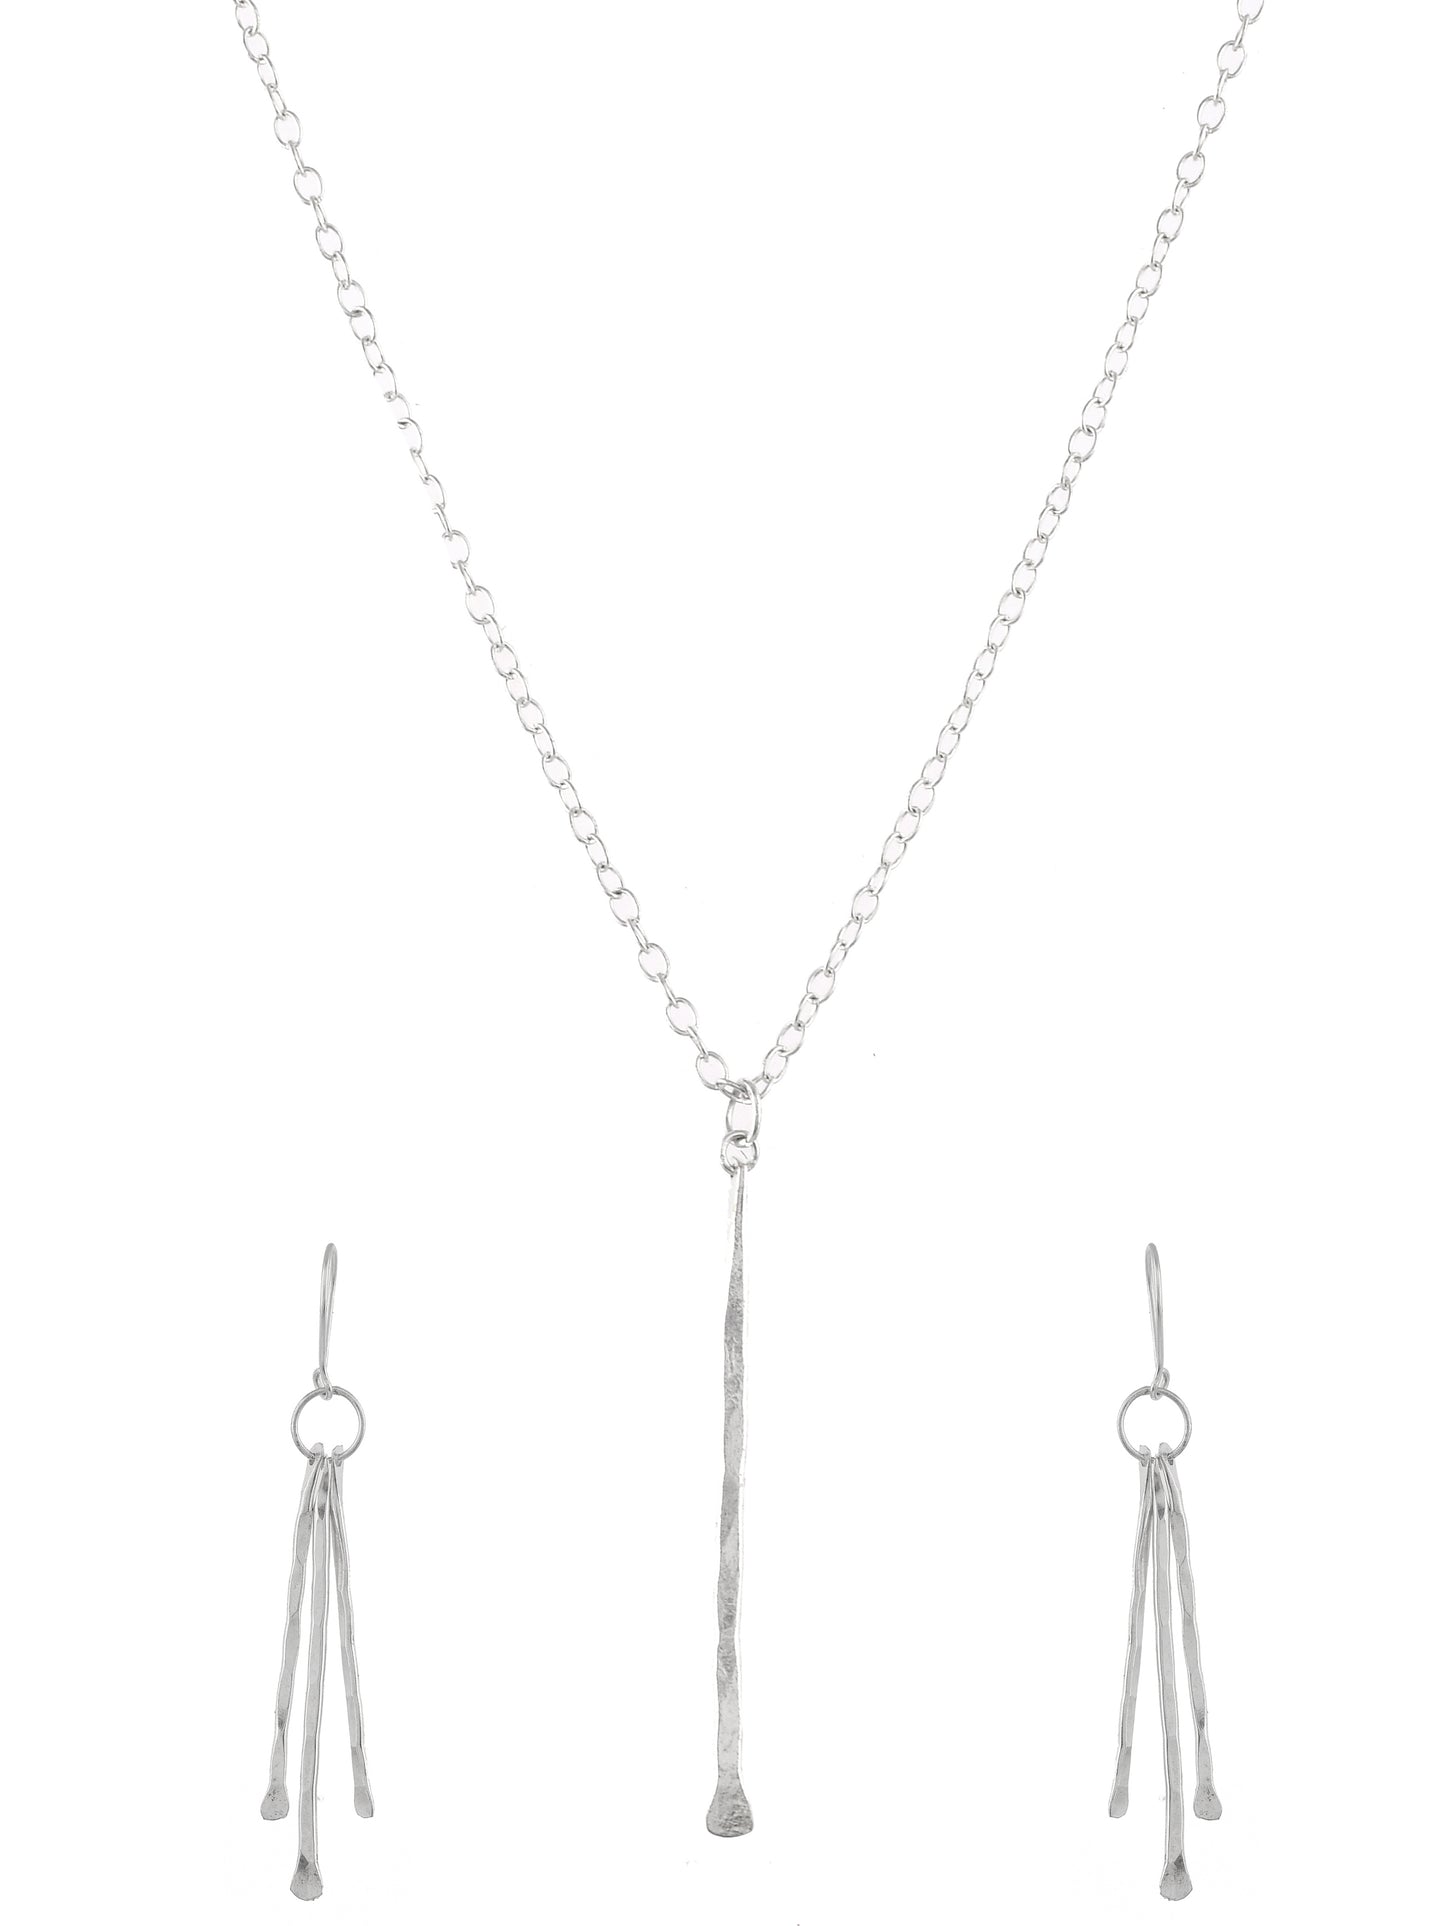 Silver Plated Western Necklace Earrings Set